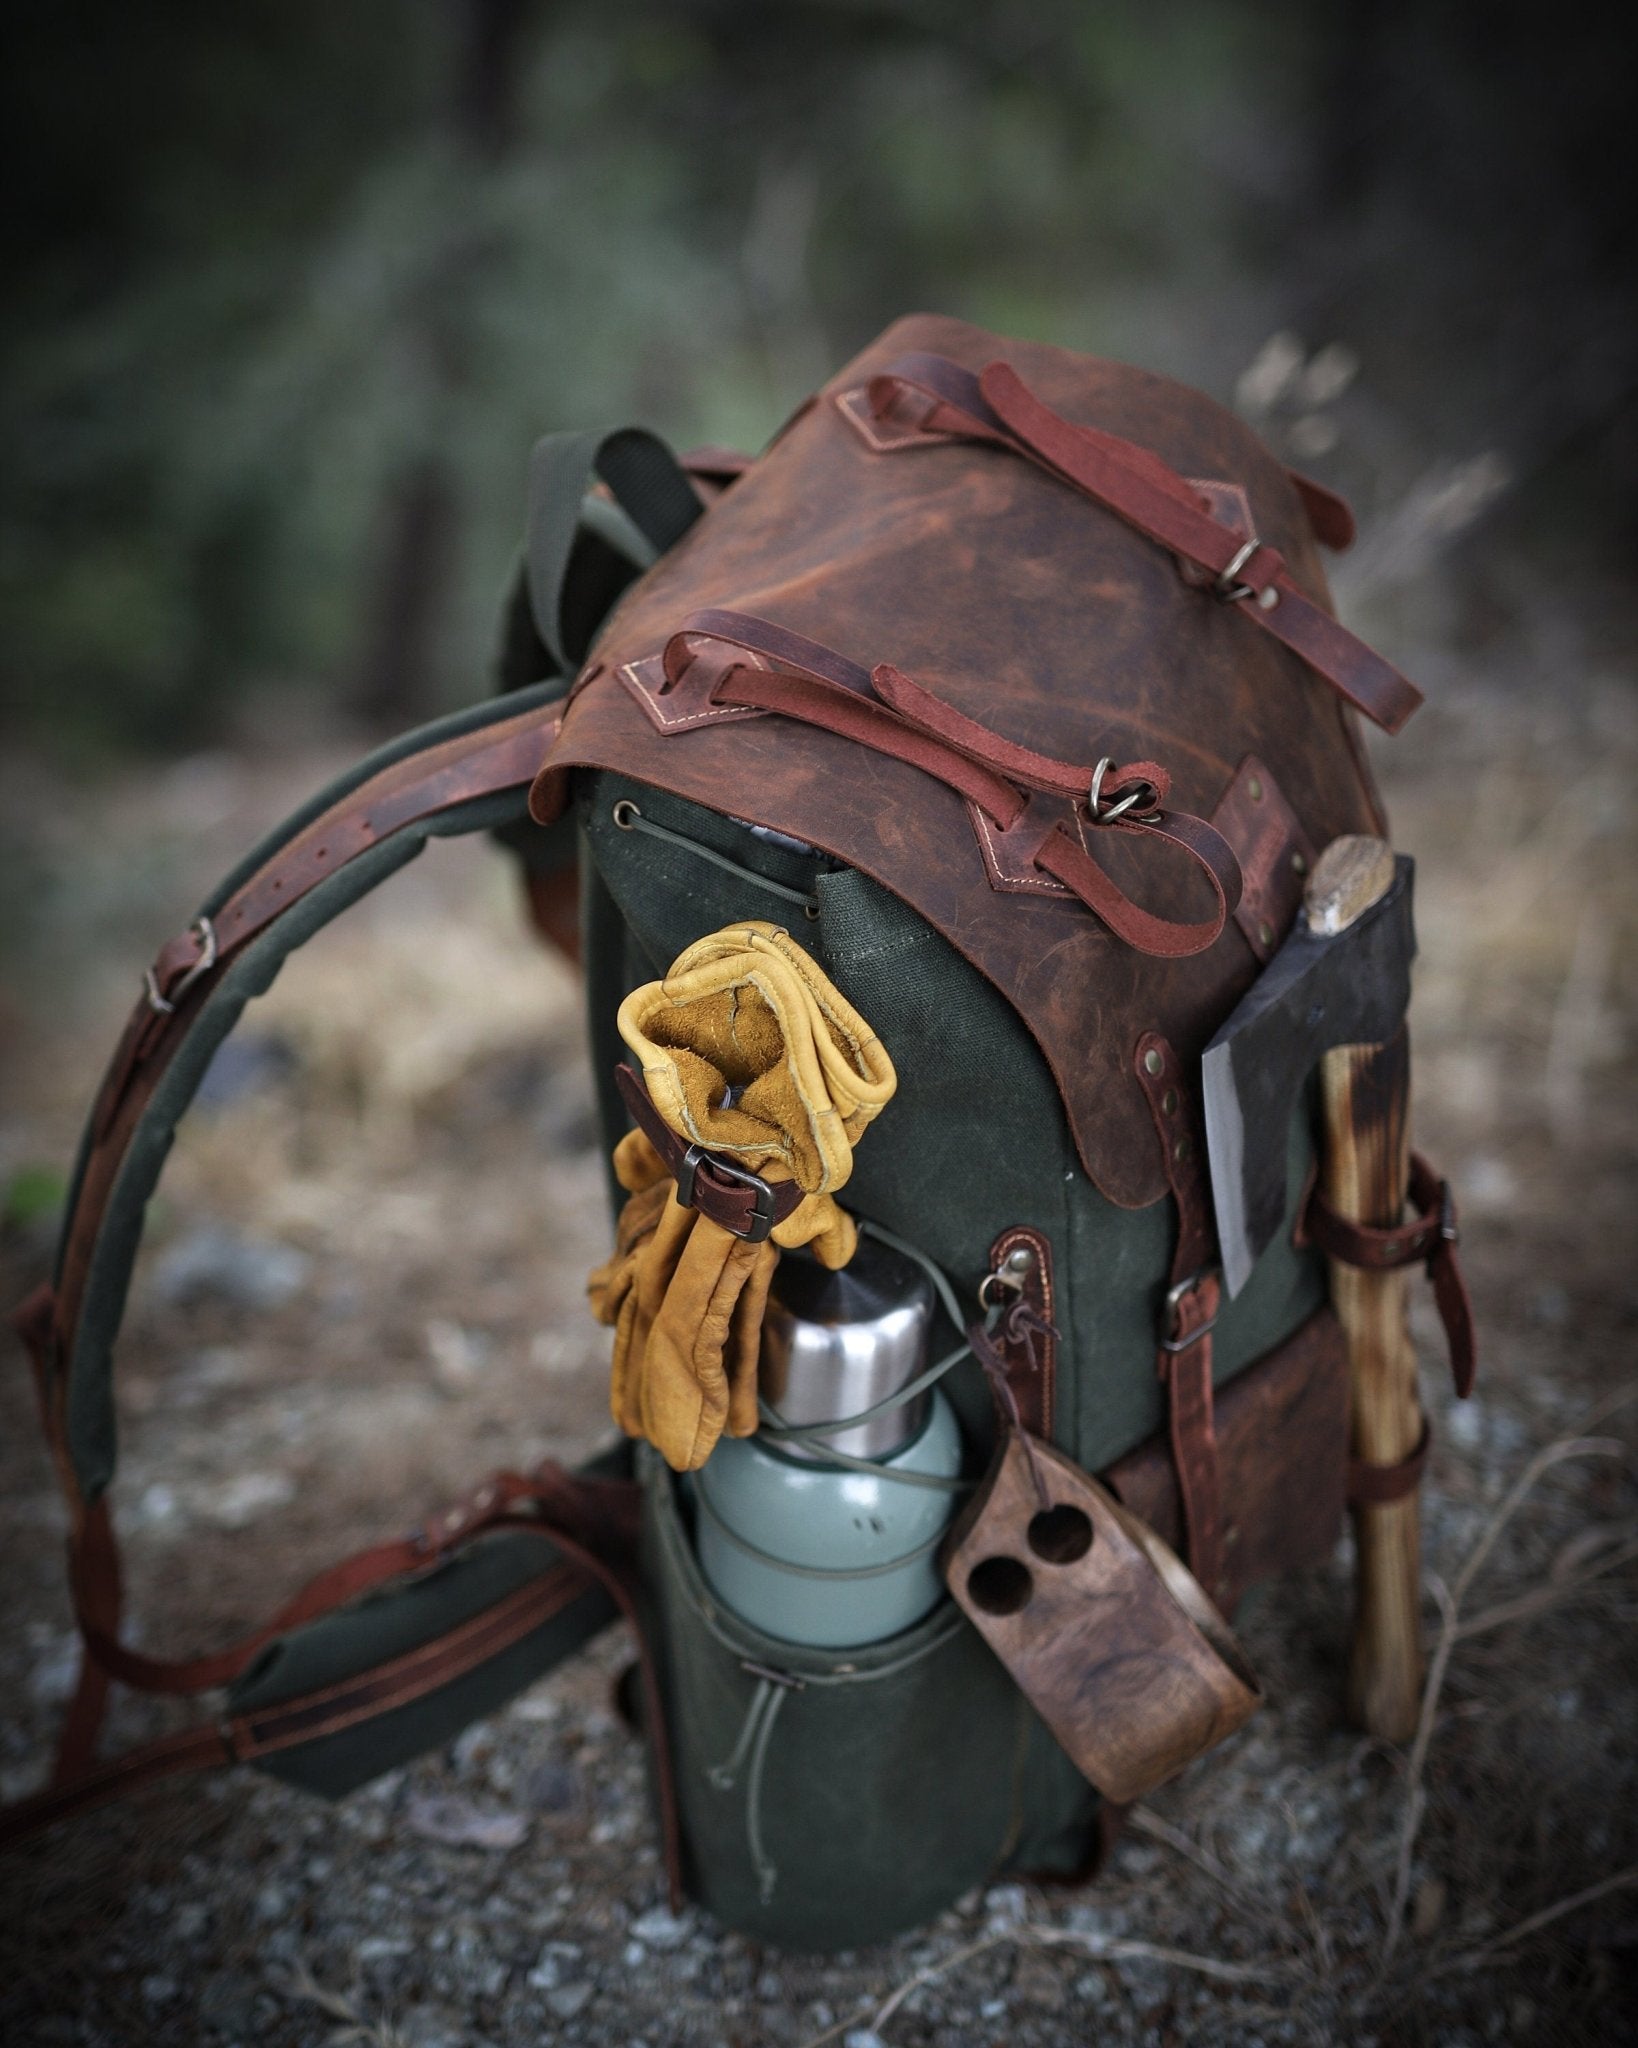 Waxed Canvas Backpack, The Bushcrafter 30L